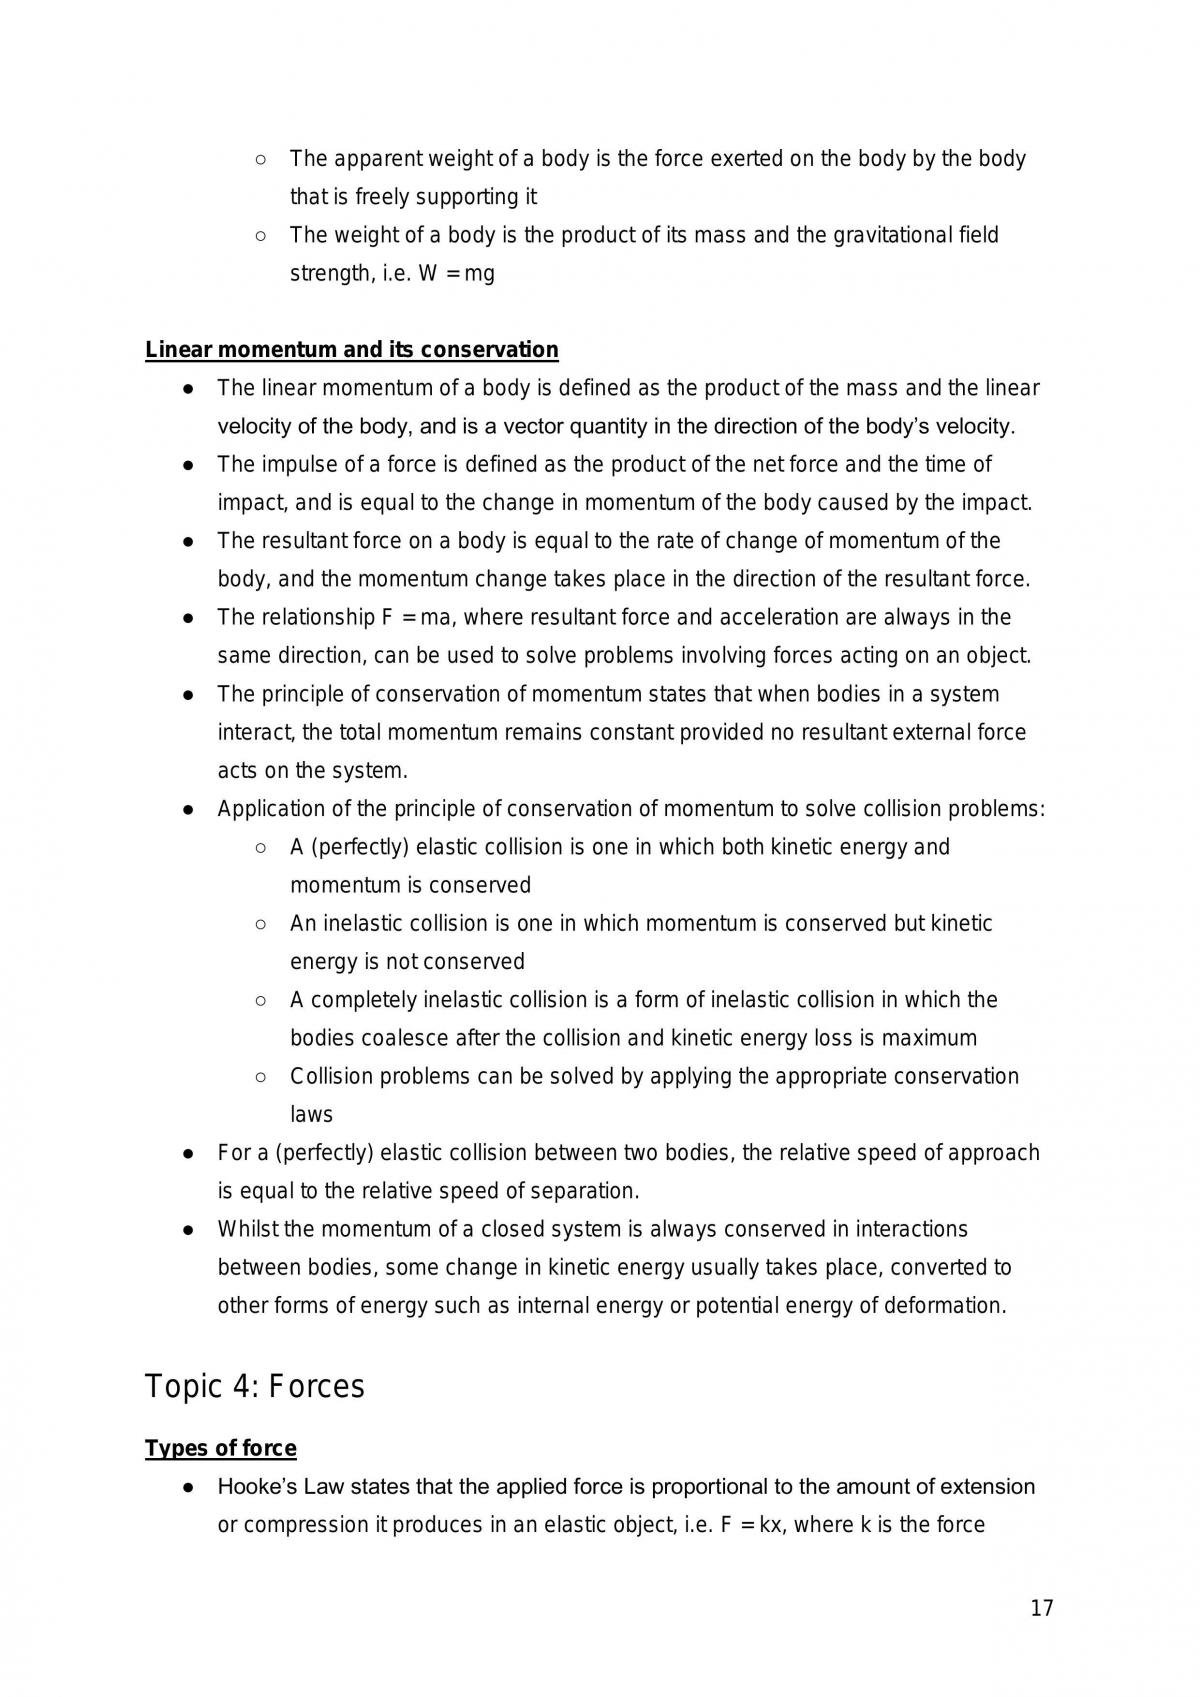 GCE A Levels H3 Physics - Page 17